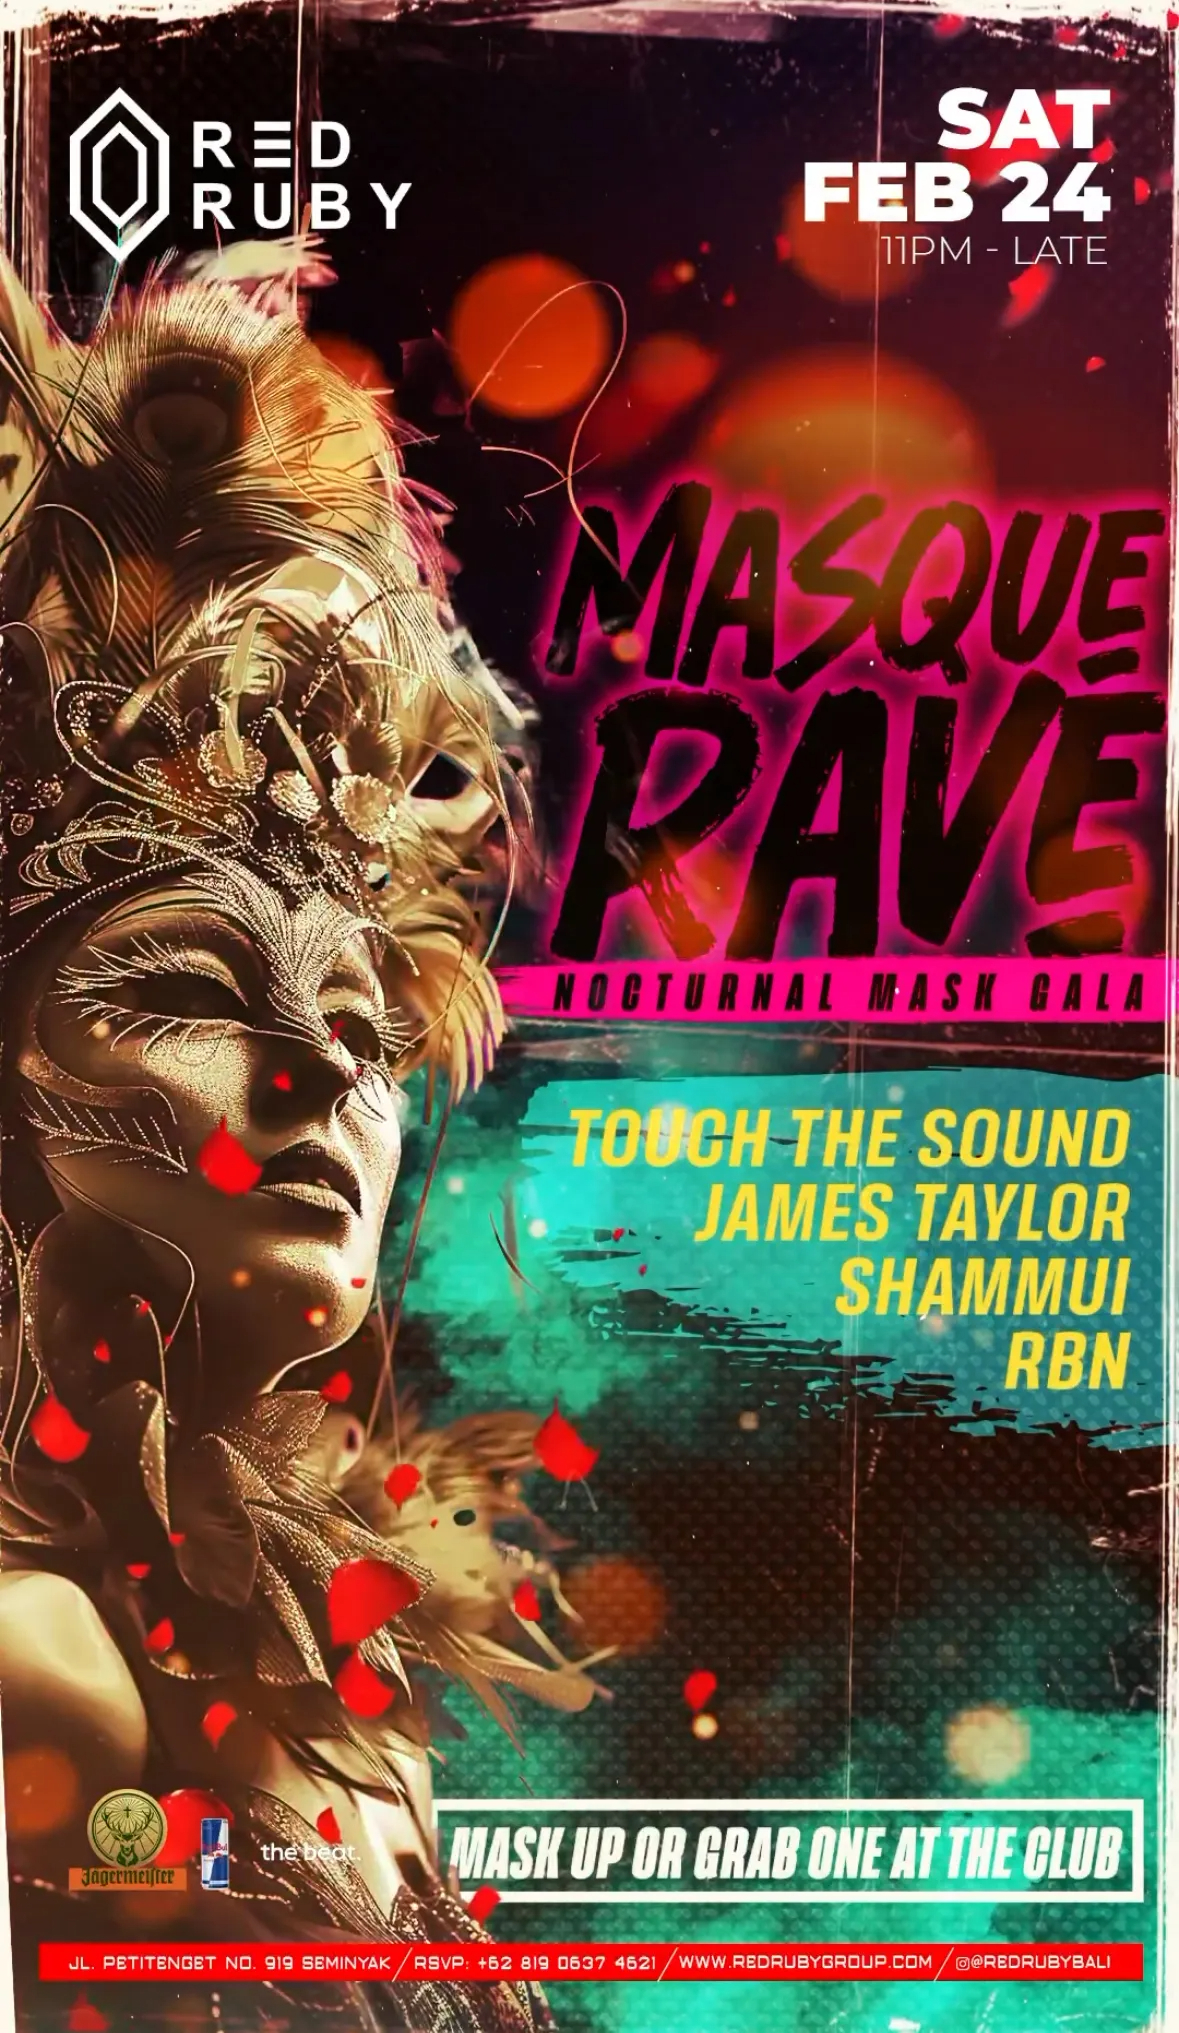 Party Masque Rave 13231